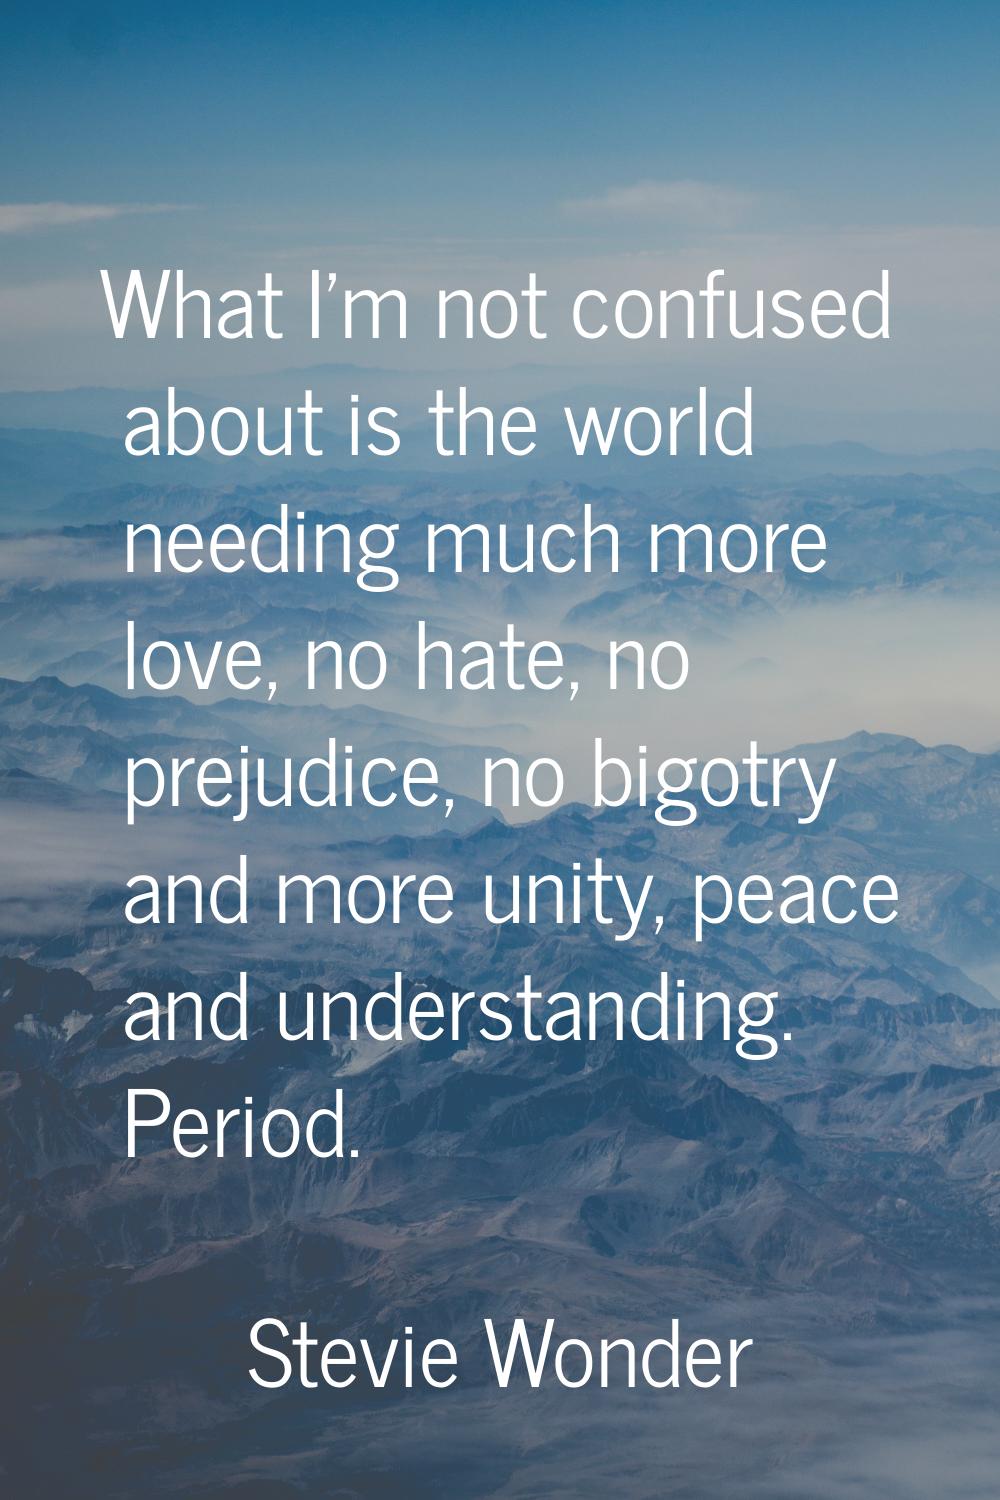 What I'm not confused about is the world needing much more love, no hate, no prejudice, no bigotry 